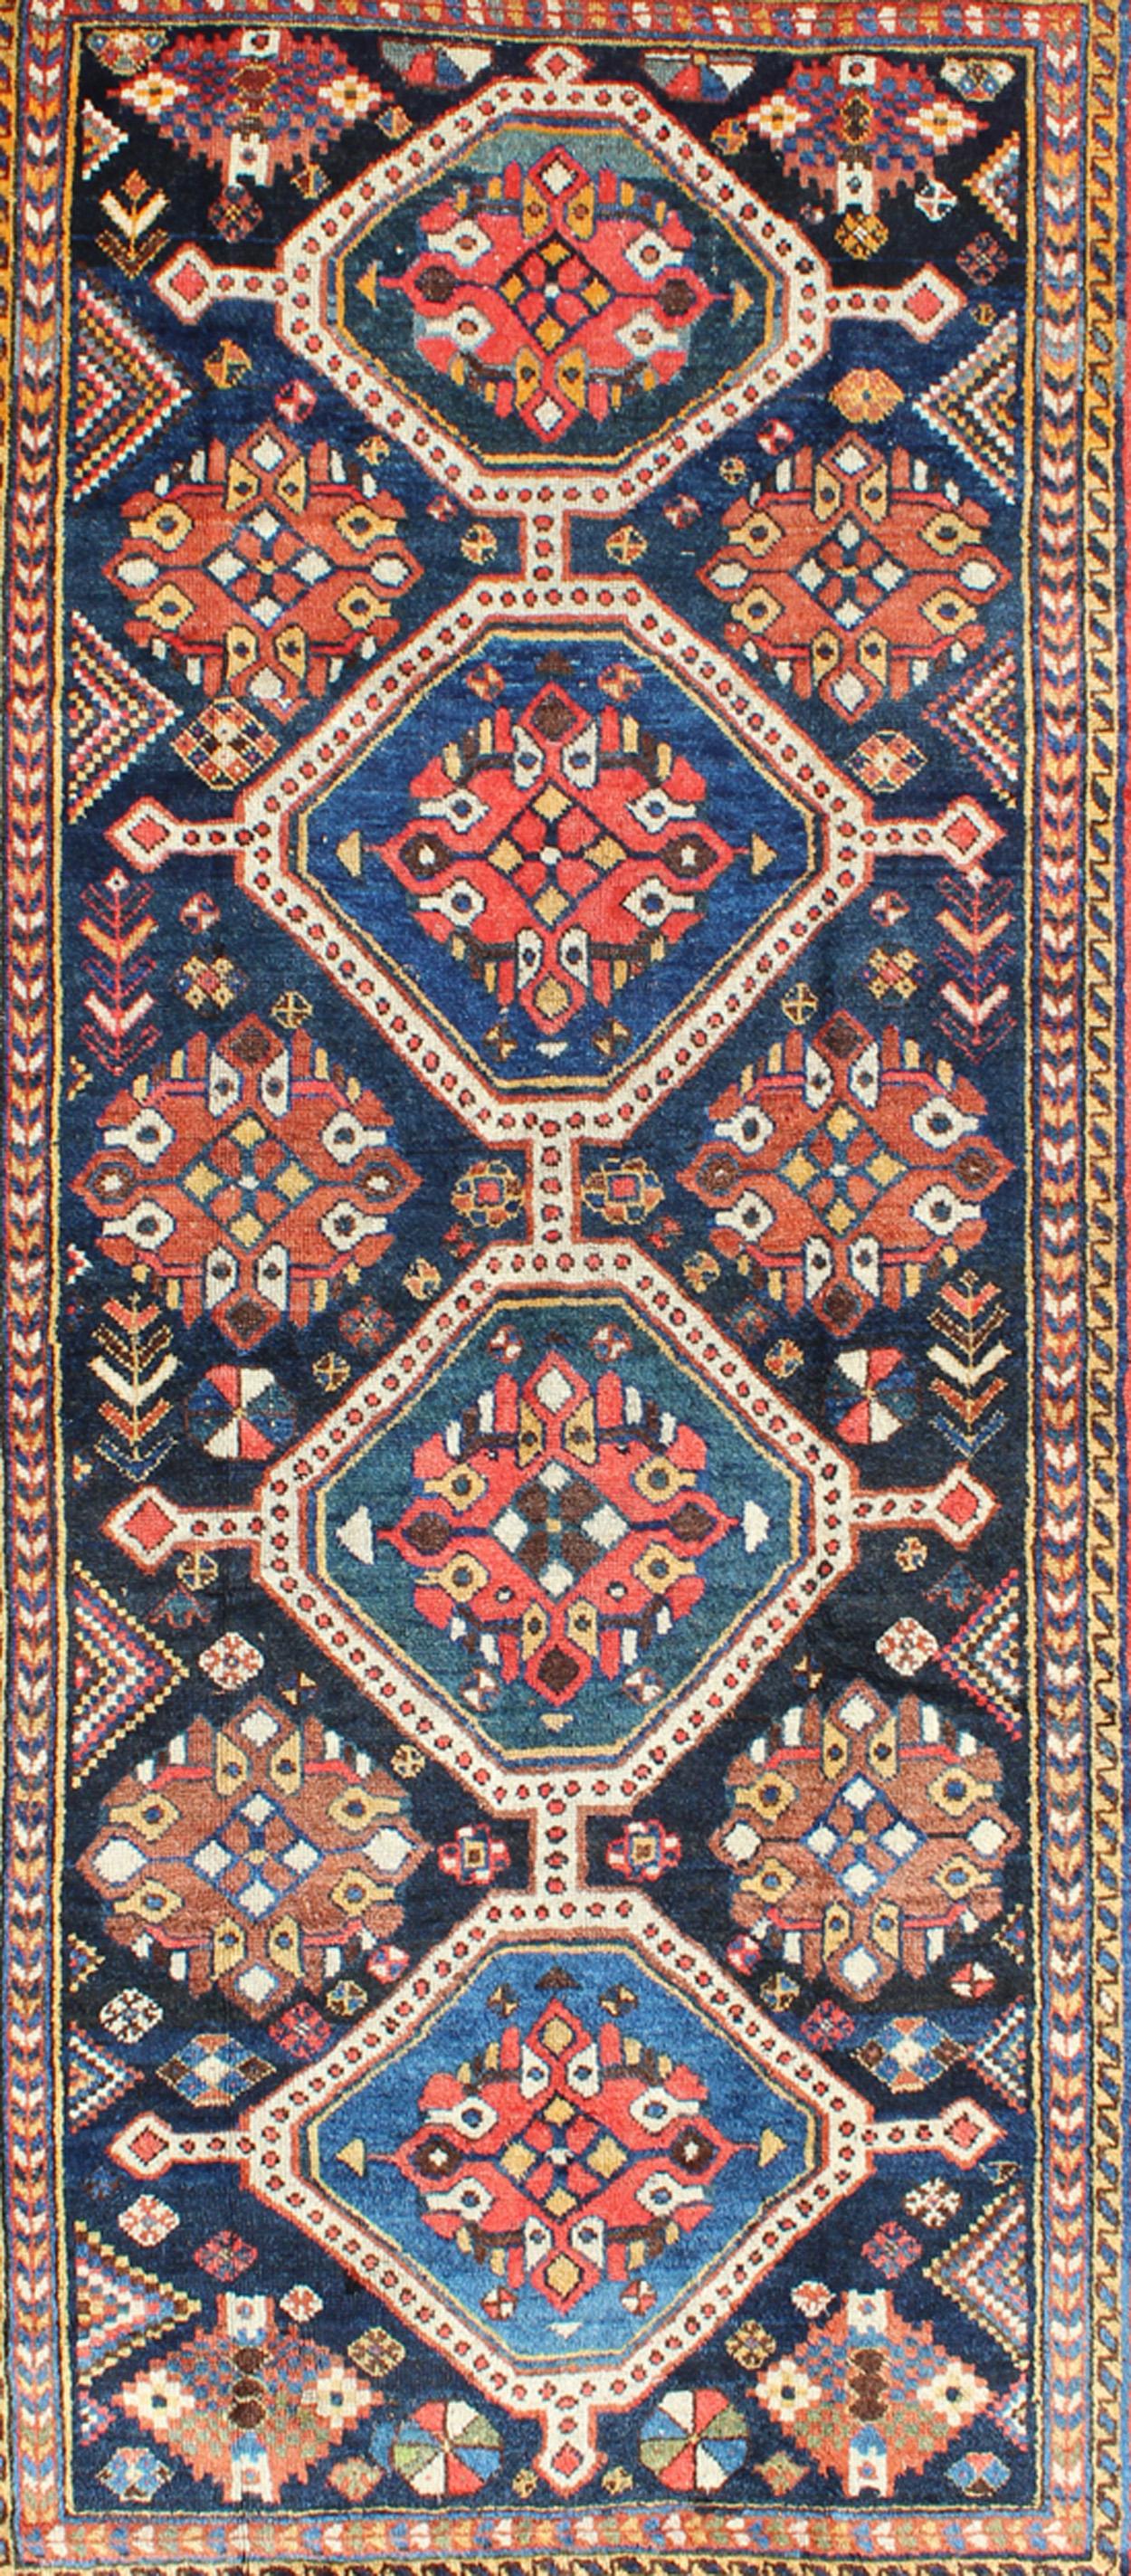 Tribal Antique Persian Qashqai Rug with Four-Medallion Design in Blue, Red, Brown Tones For Sale